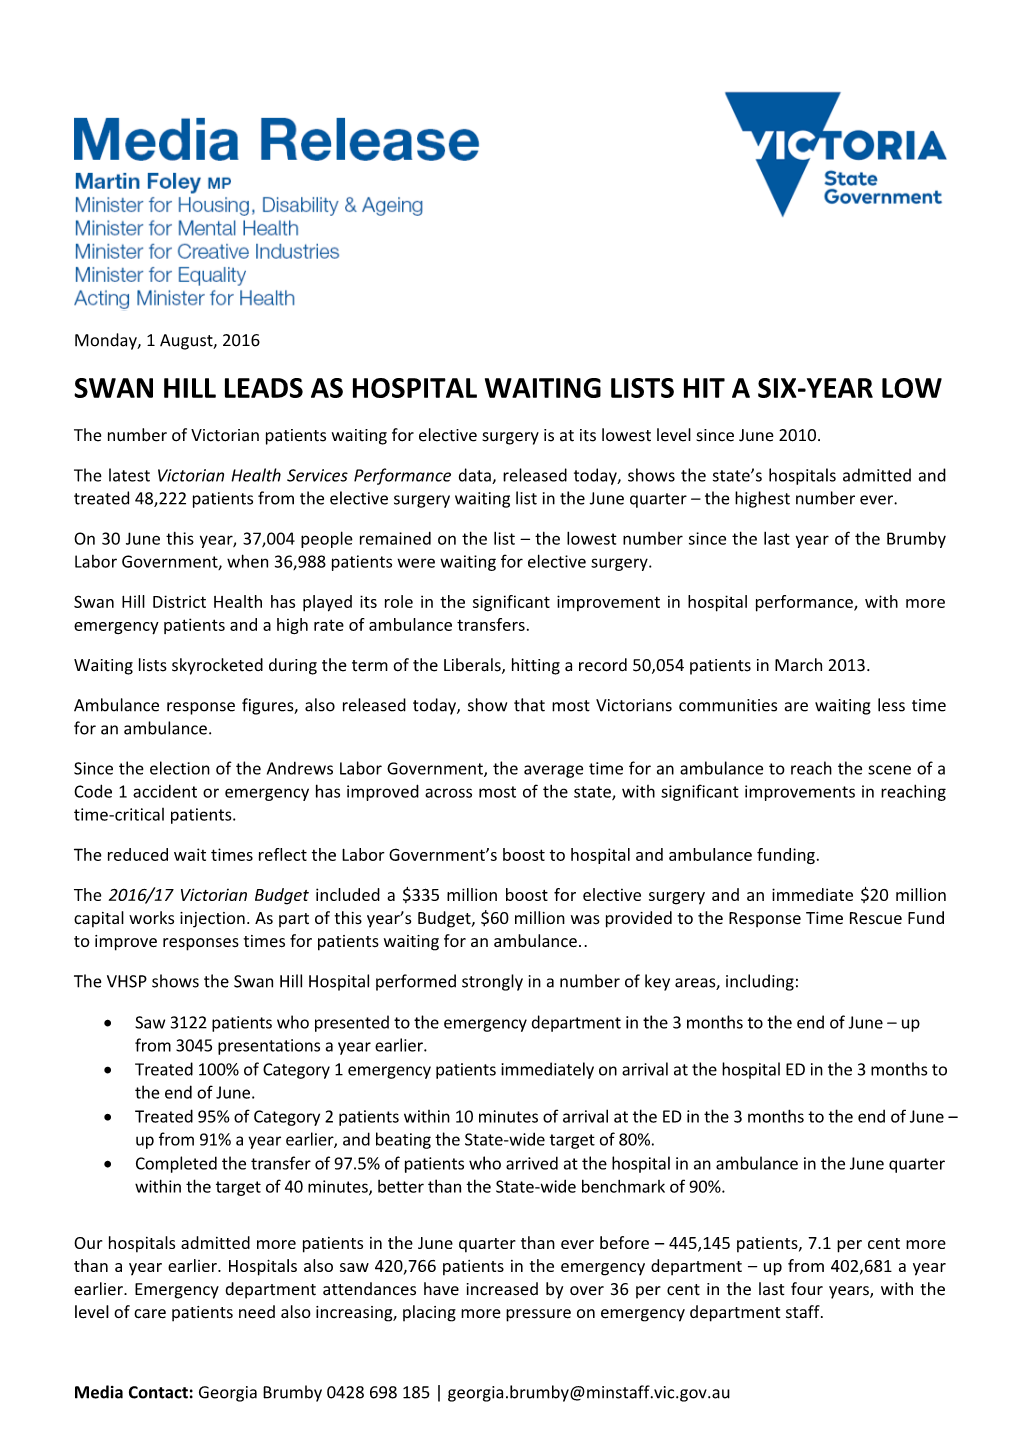 Swan Hill Leads As Hospital Waiting Lists Hit a Six-Year Low